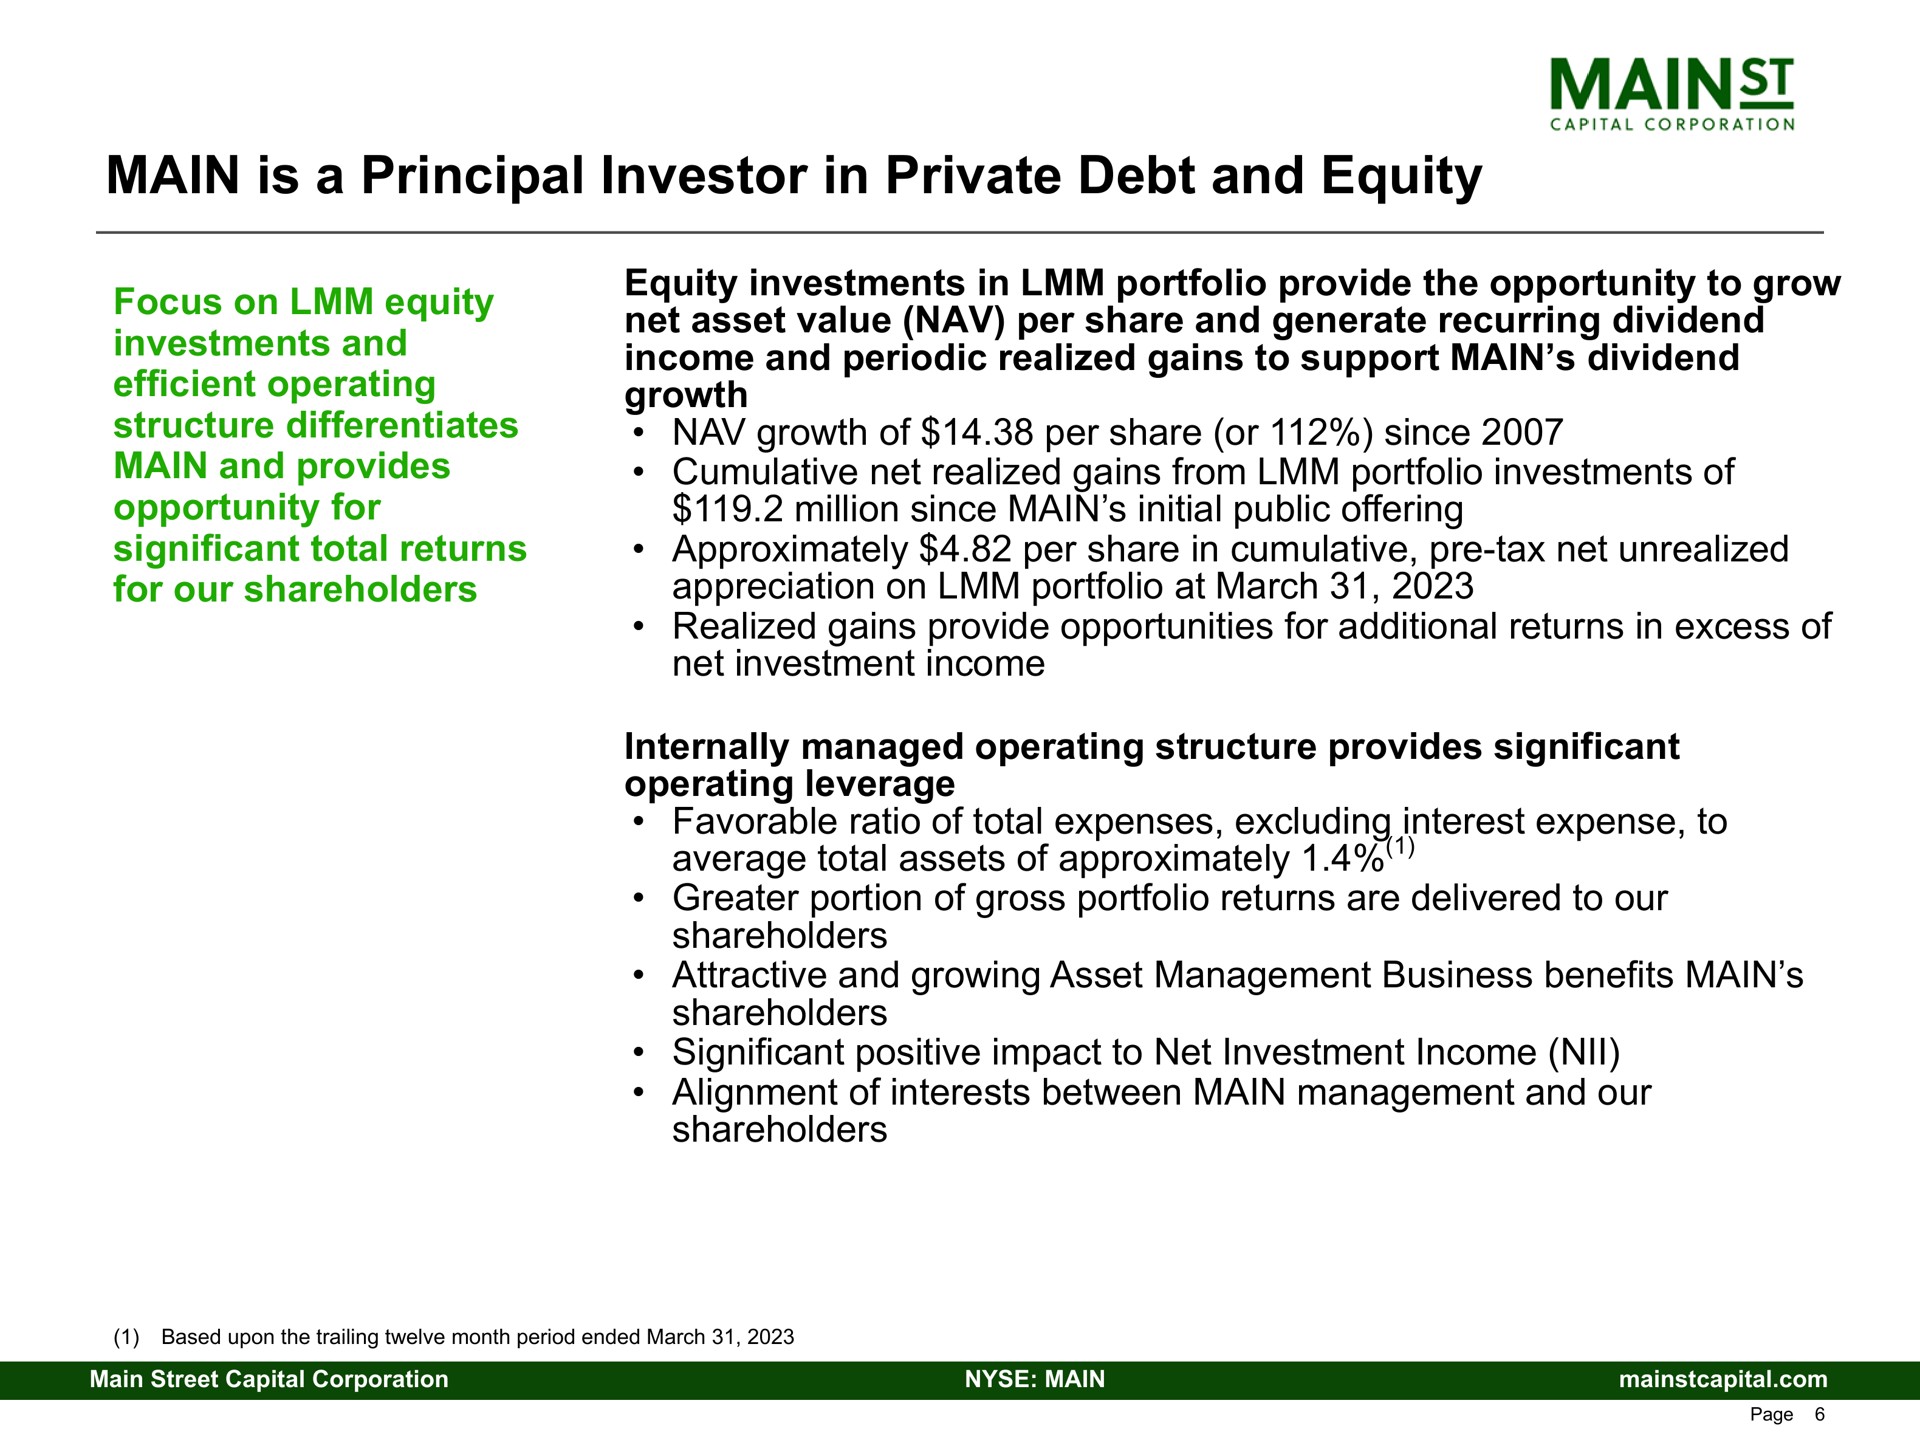 main is a principal investor in private debt and equity structure differentiates provides growth of per share or since cumulative net realized gains from portfolio investments of | Main Street Capital